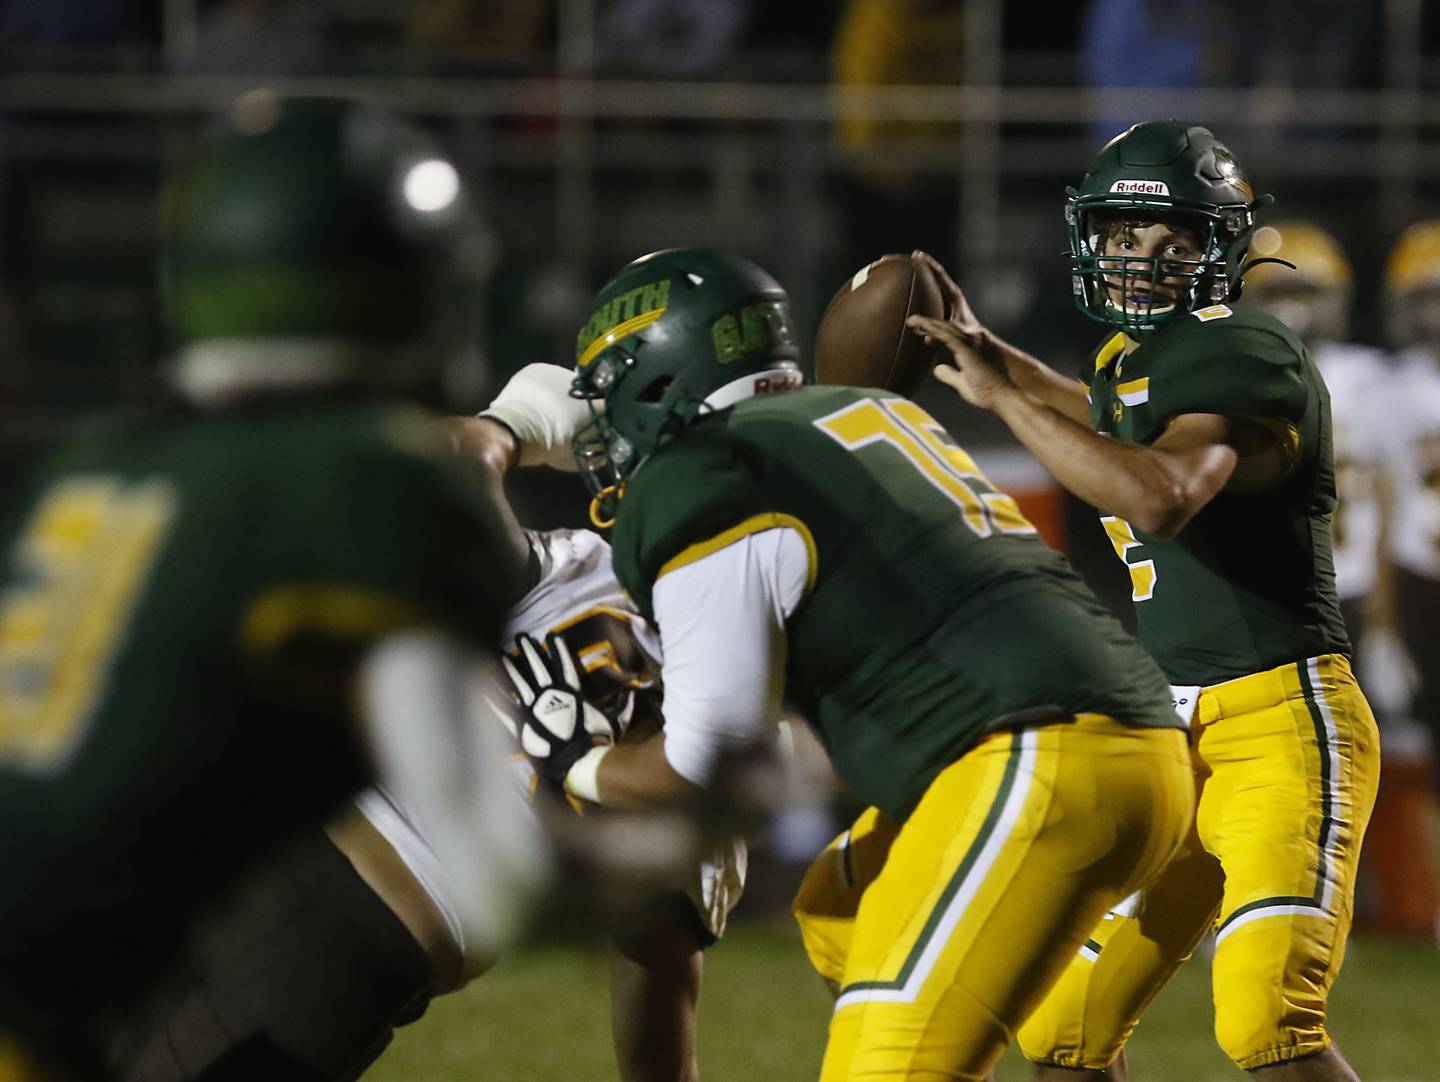 Crystal Lake South's  Caden Casimino looks to pass during a Fox Valley Conference football game Friday, Aug. 26, 2022, between Crystal Lake South and Jacobs at Crystal Lake South High School.